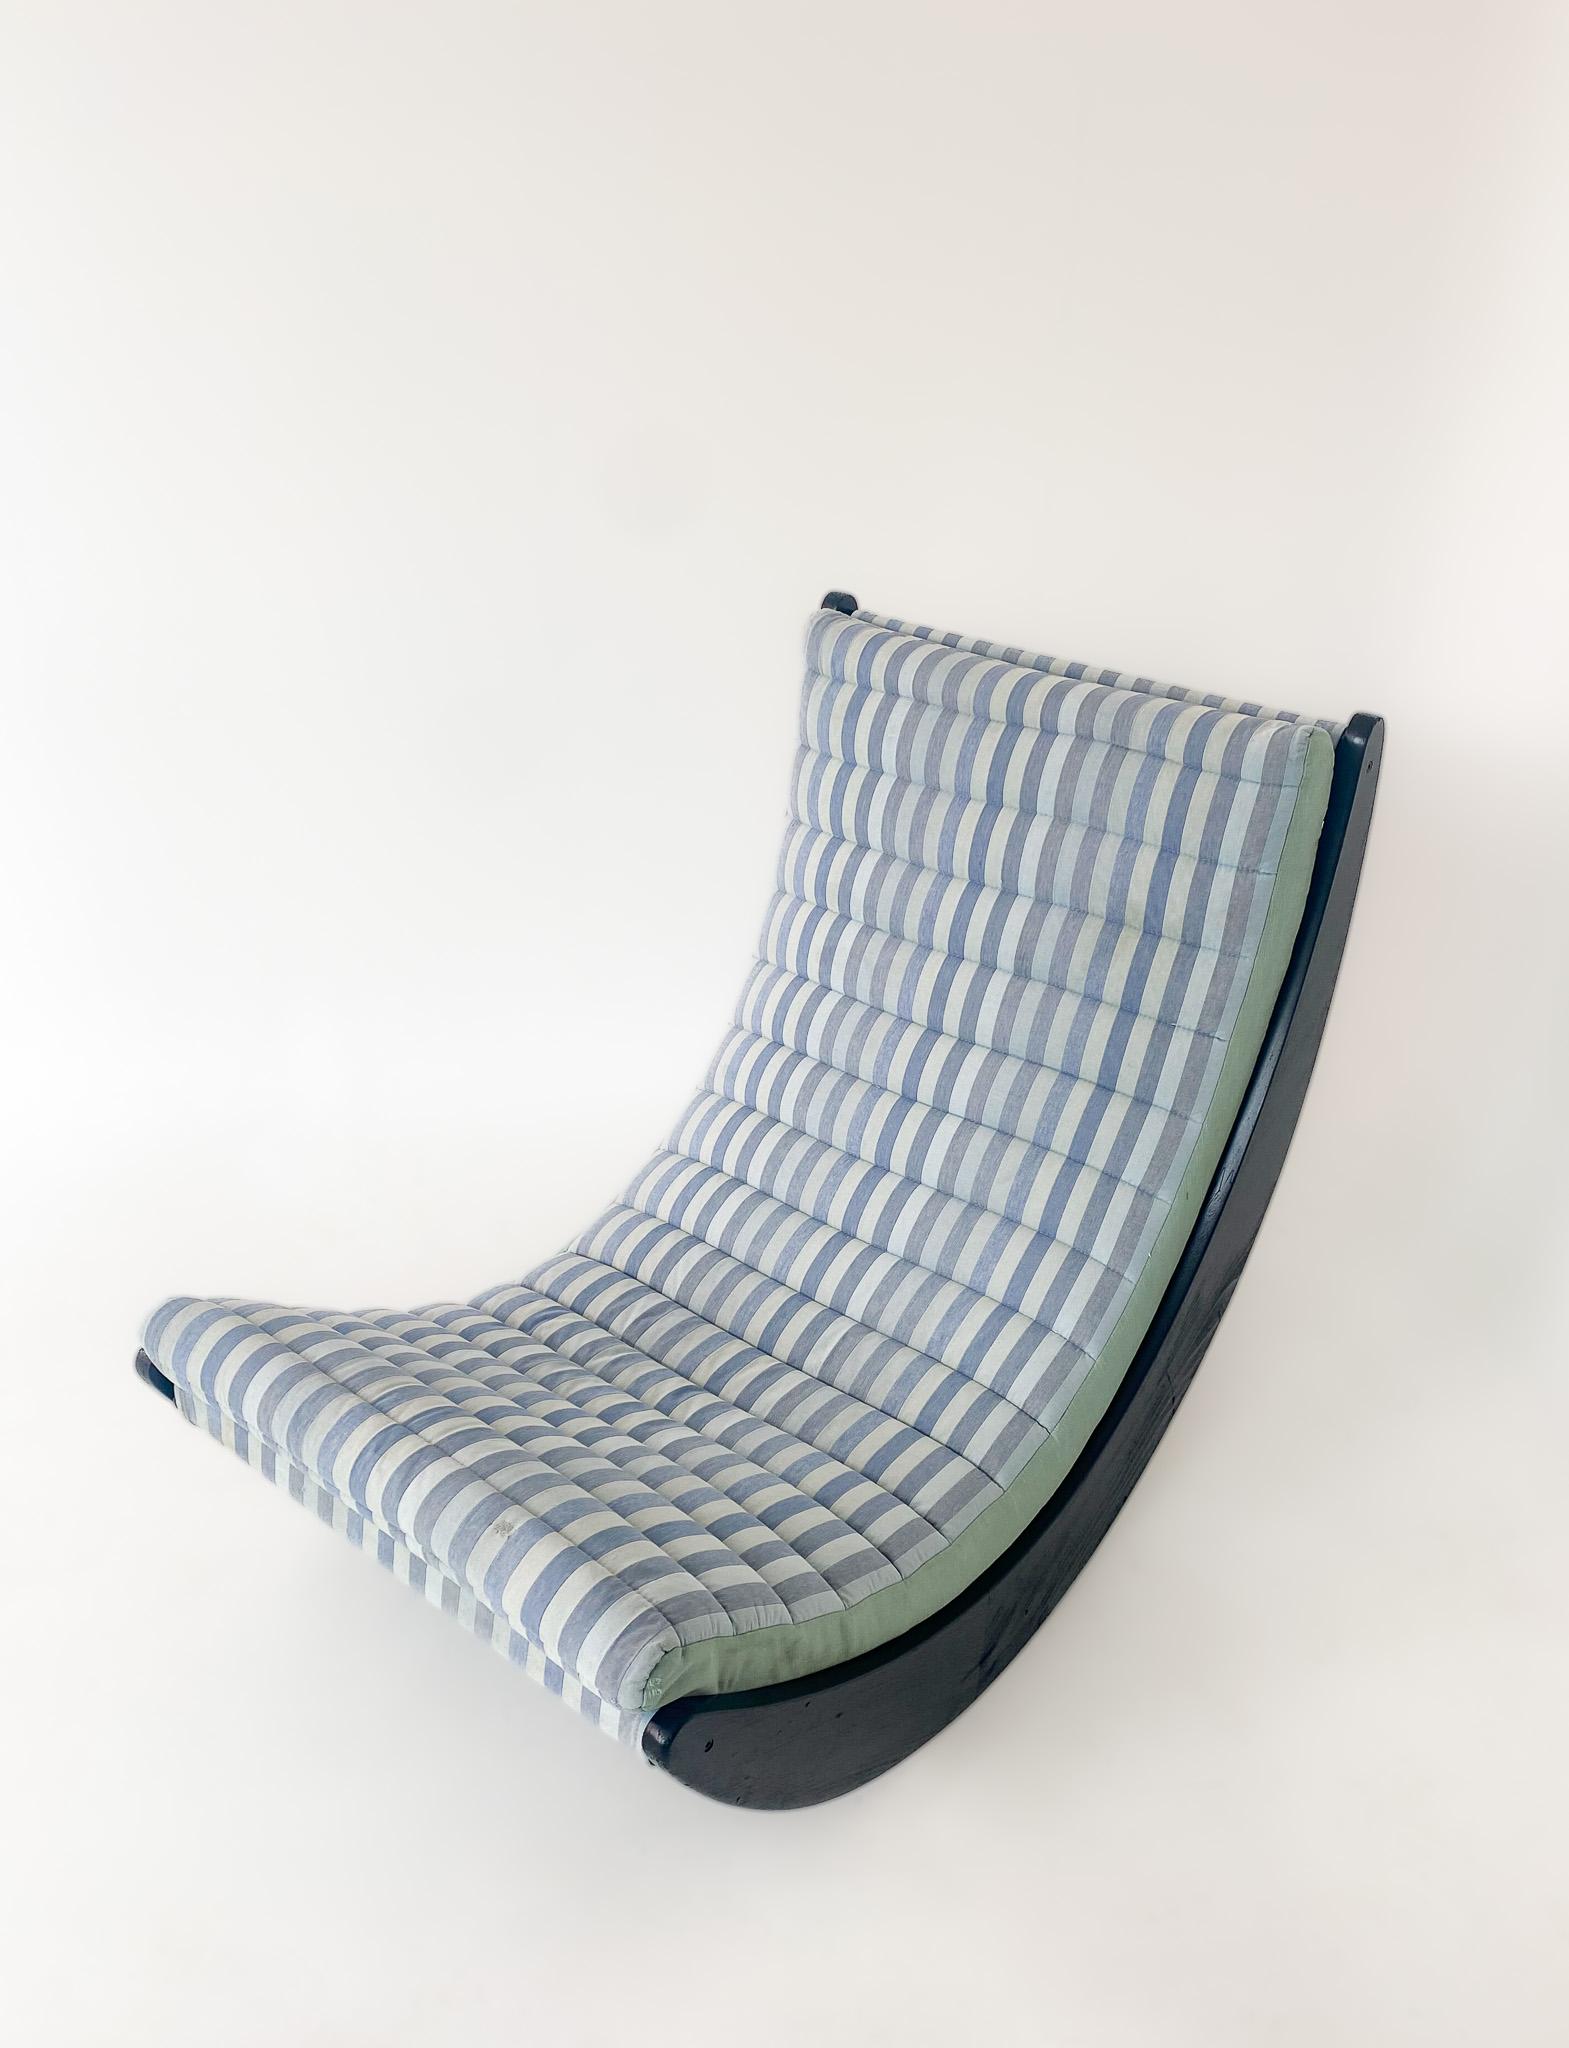 20th Century Mid-Century Modern Rocking Chair Relaxer by Verner Panton, Germany, 1970s For Sale